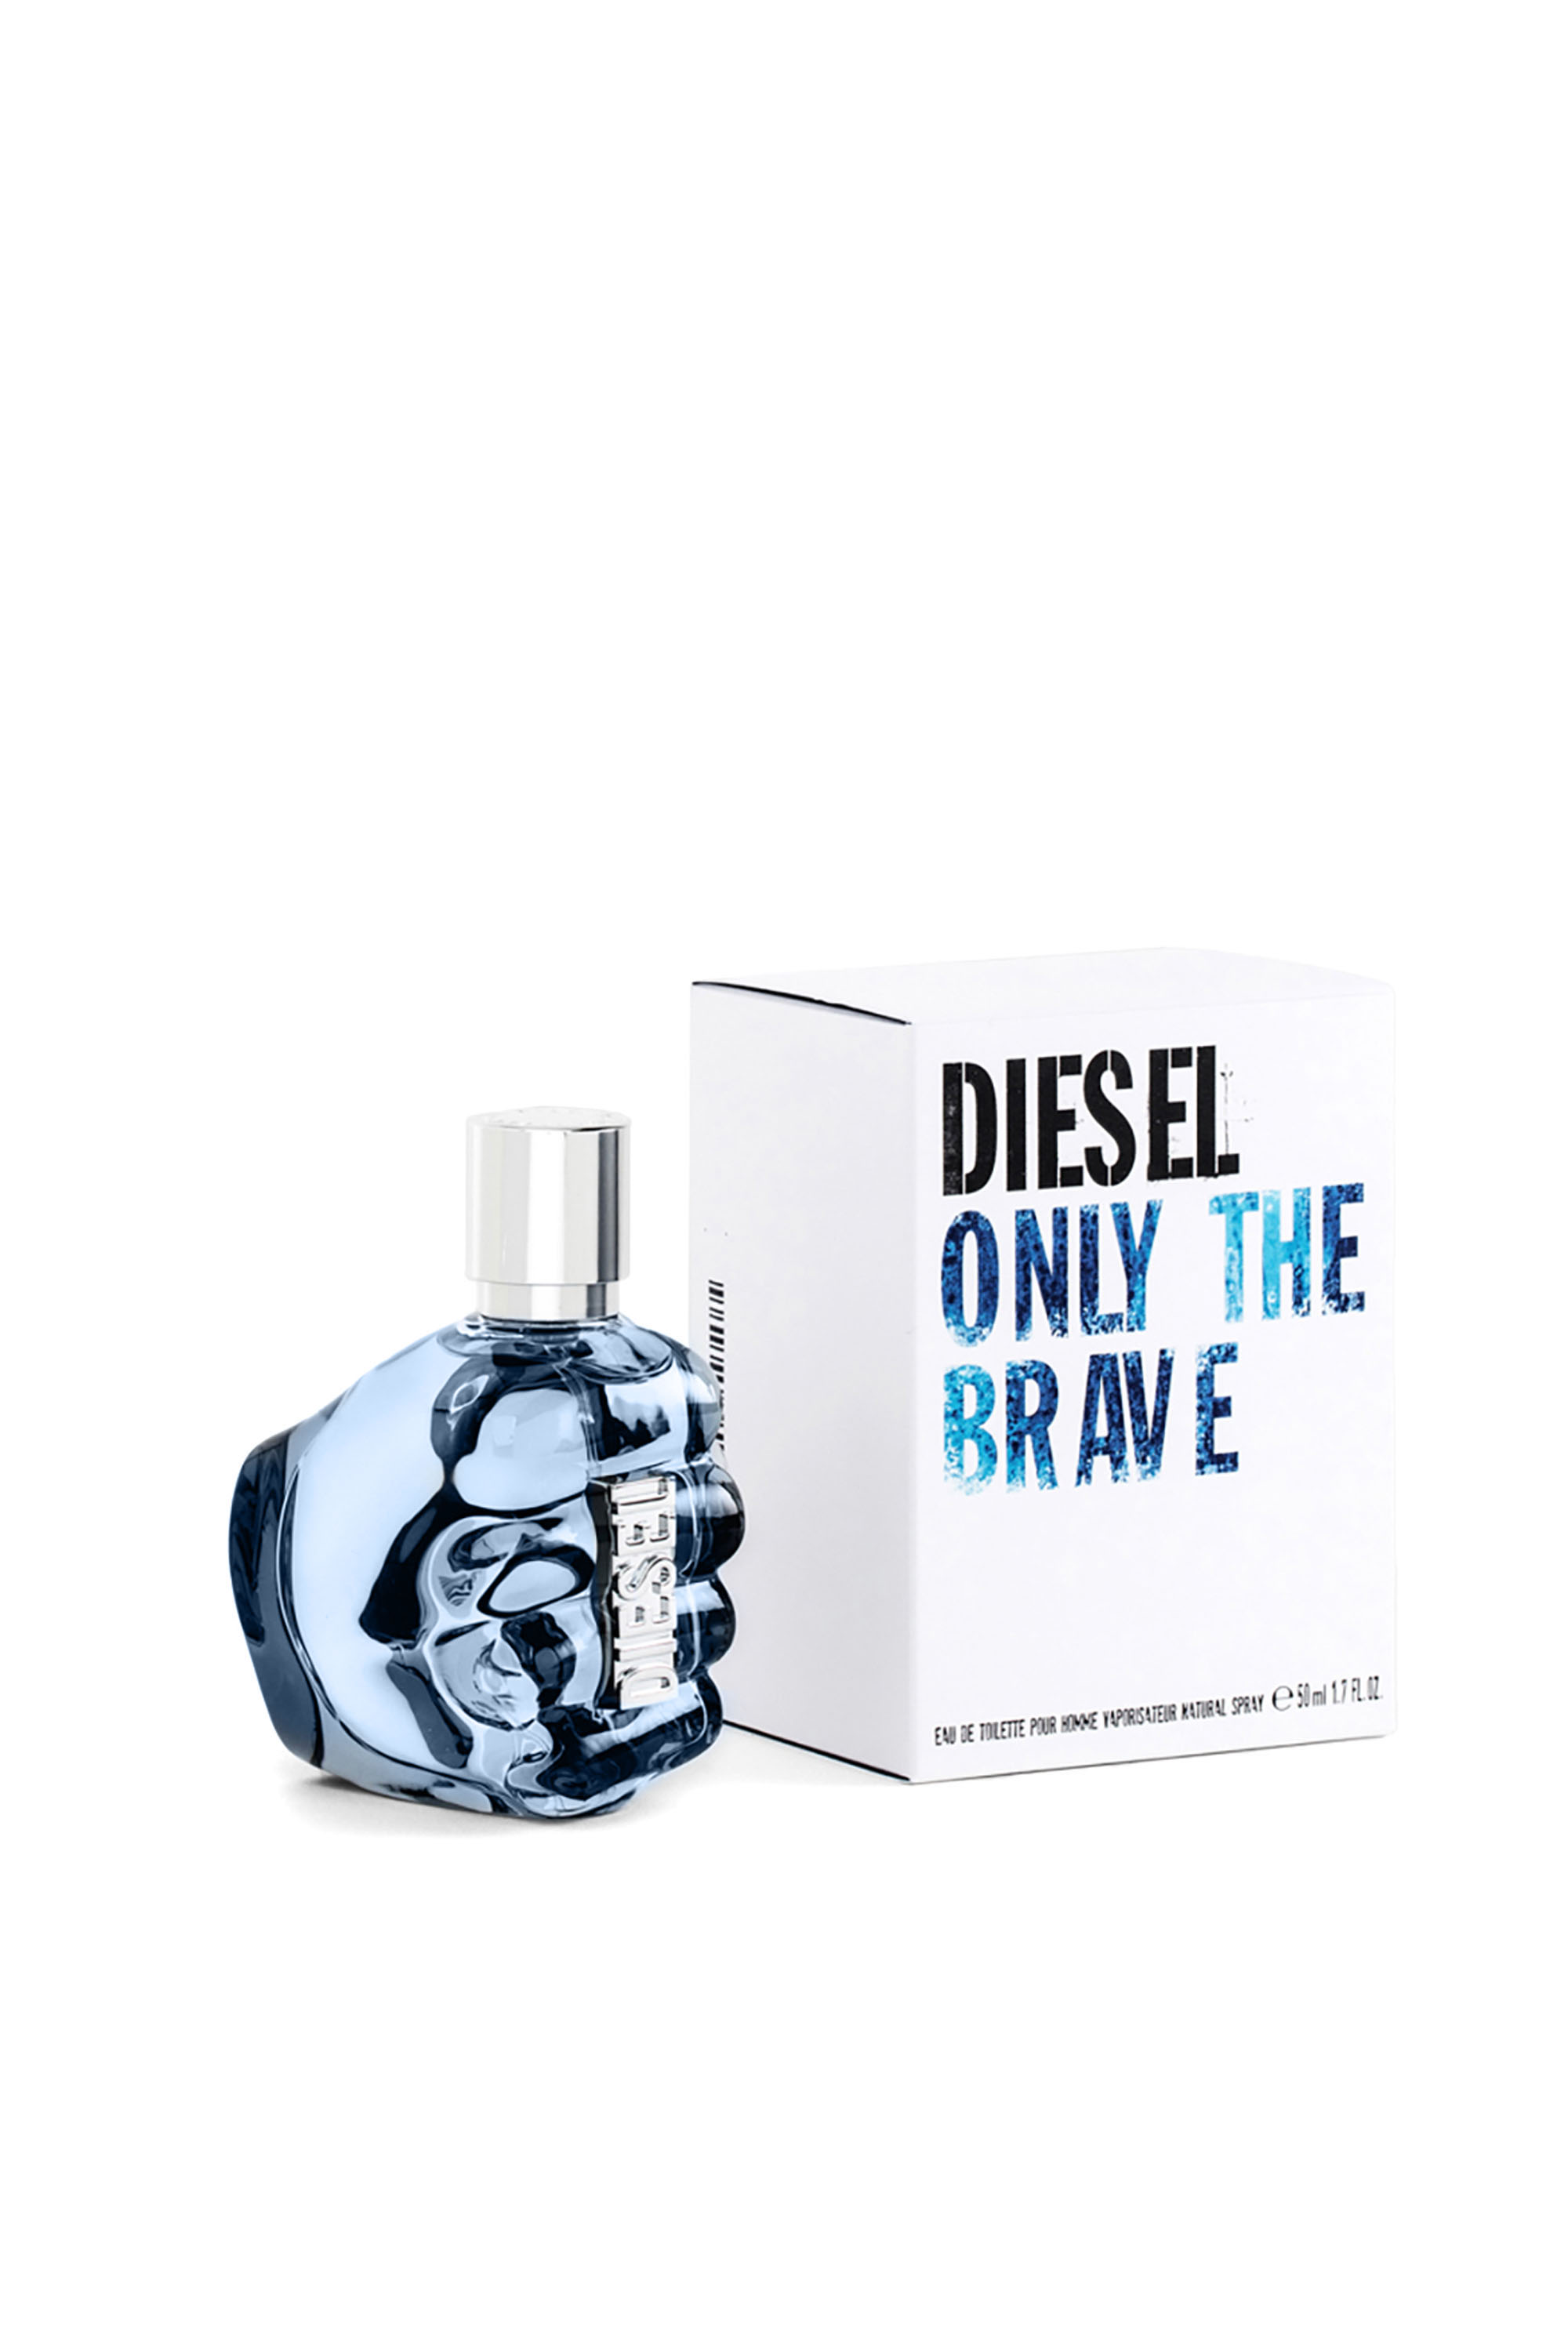 Diesel - ONLY THE BRAVE 50ML, Man Only the brave 50ml, eau de toilette in Blue - Image 2